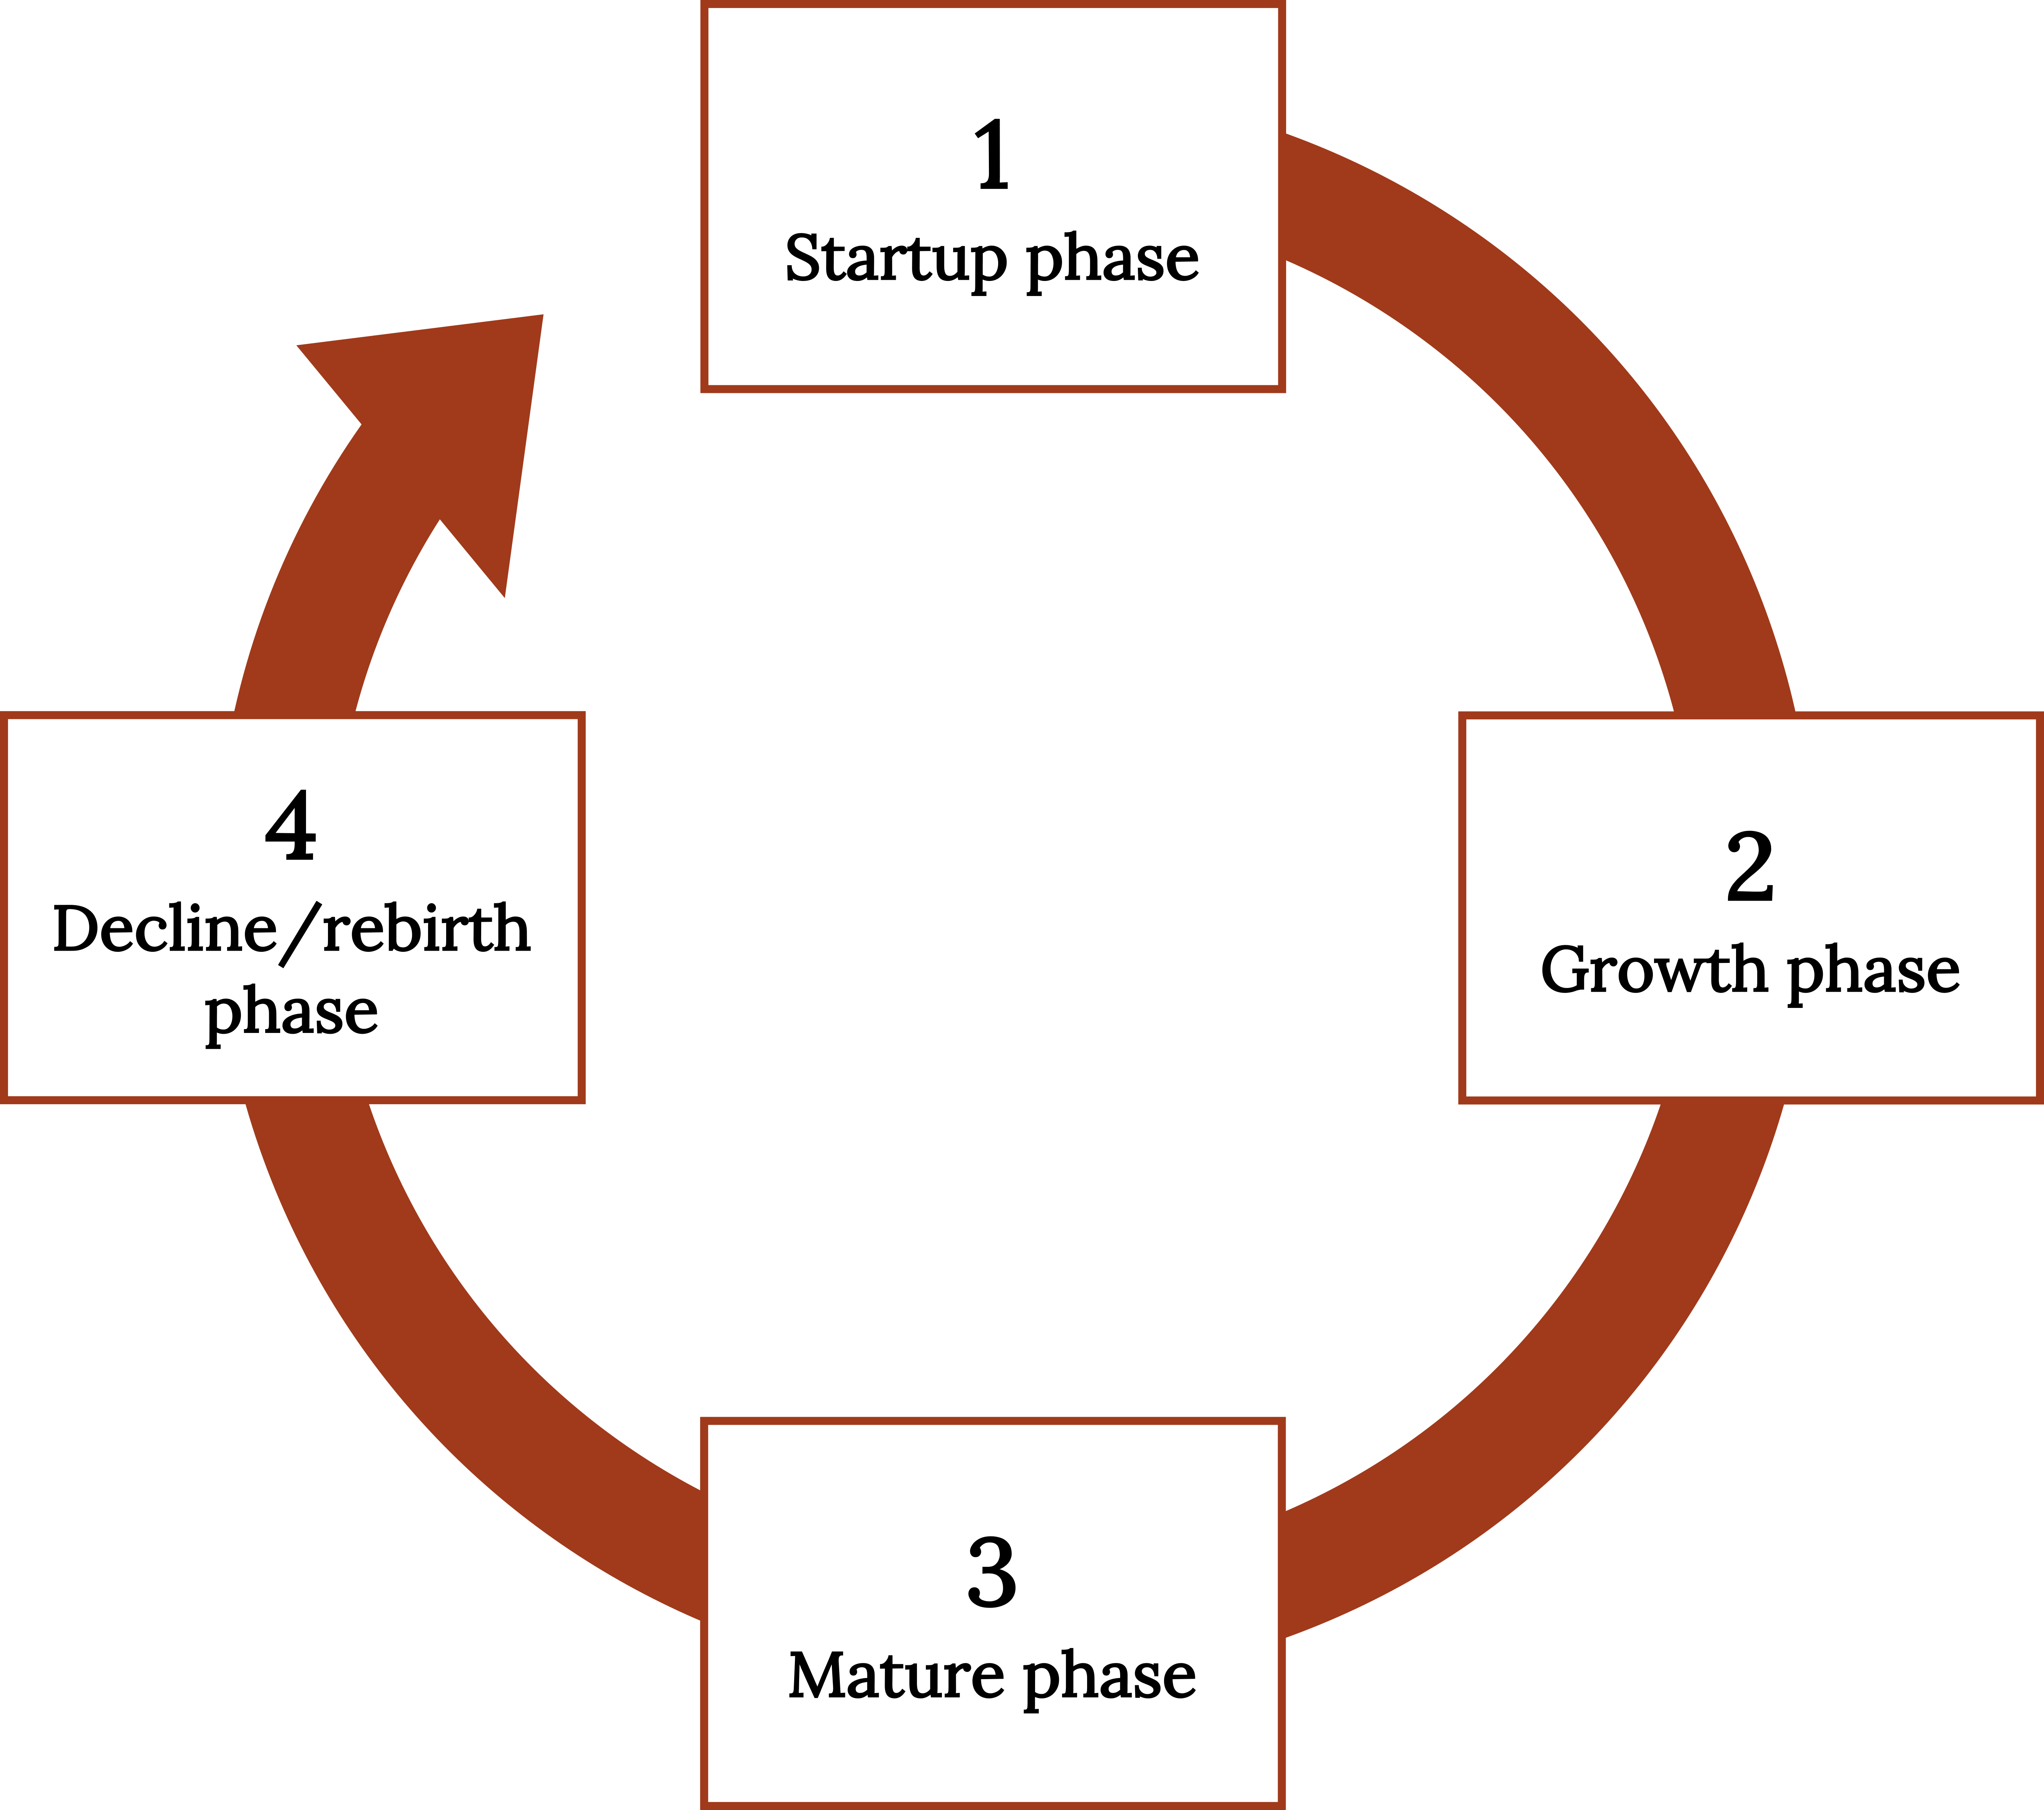 Clockwise circular arrow with 4 phases laid on top. Phase 1: startup. Phase 2: growth. Phase 3: mature. Phase 4: Decline/rebirth.